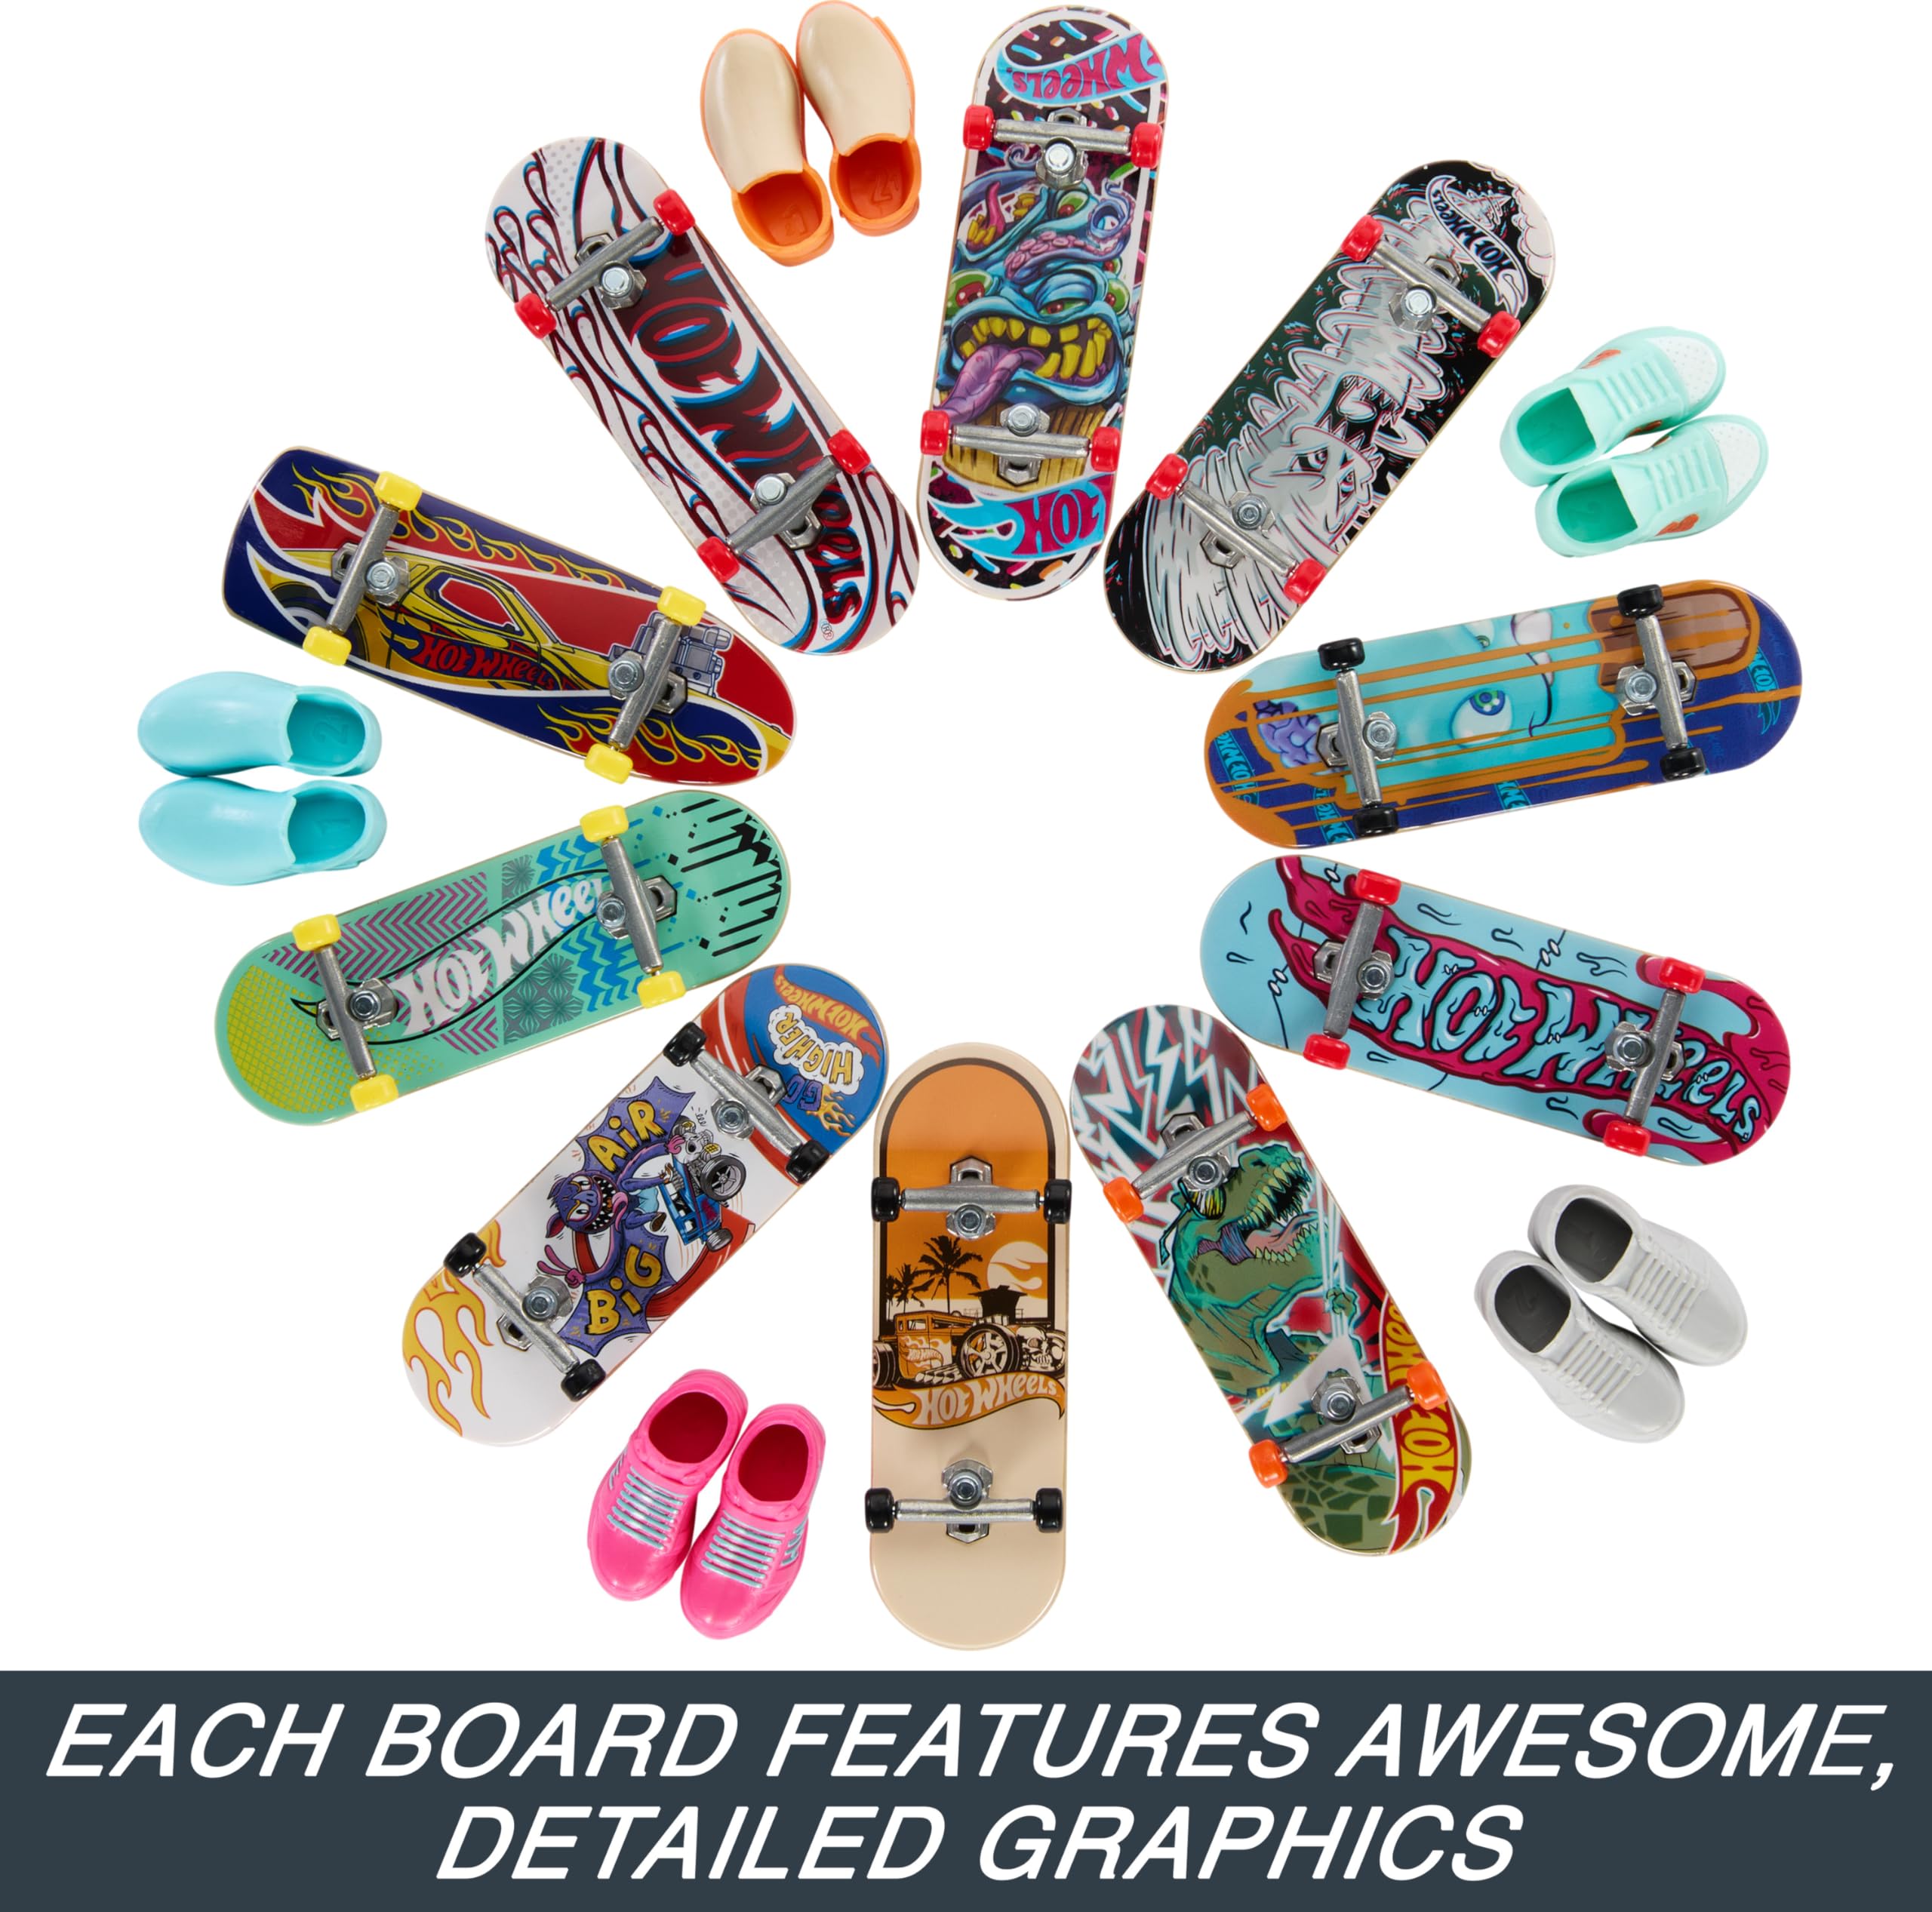 Hot Wheels Skate Fingerboards 10-Pack, Set of 10 Finger Skateboards with 5 Pairs of Removable Skate Shoes Themed Graphics (Amazon Exclusive)